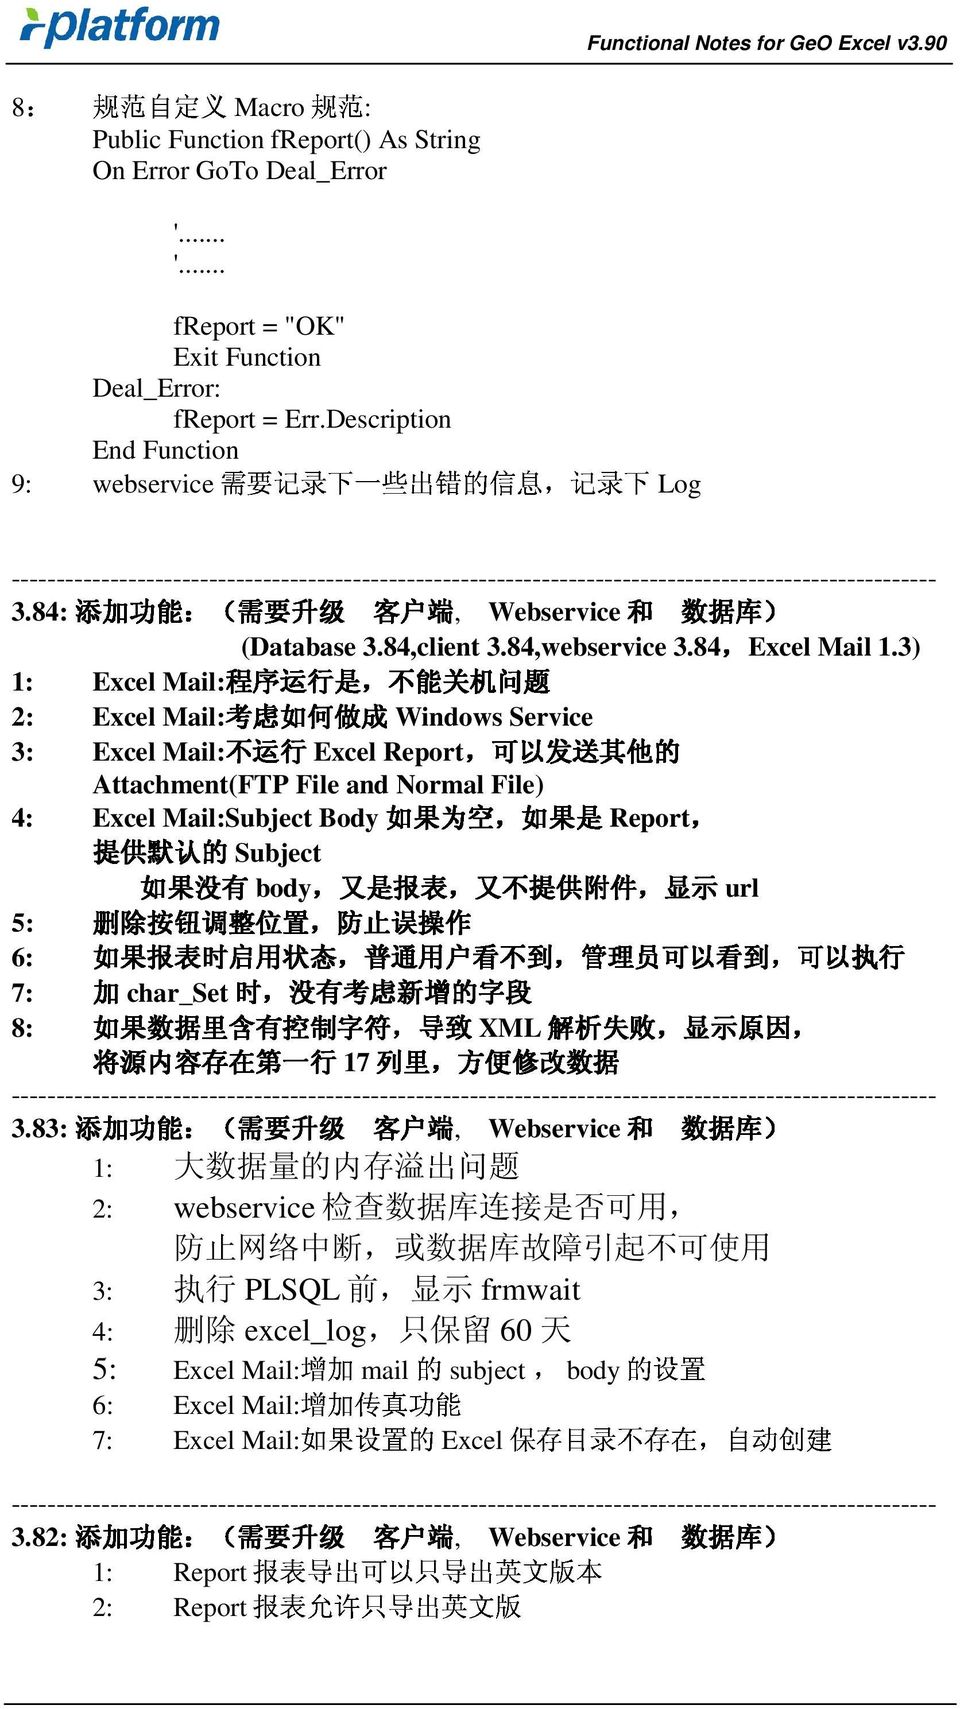 3) Excel Mail: Excel Mail: Windows Service Excel Mail: Excel Report, 可 以 发 送 其 他 的 删 供 如 默 果 认 没 的 有 如 果 为 空, 如 果 是 Attachment(FTP File and Normal File) Excel Mail:Subject Body Report, 除 按 报 钮 表 调 时